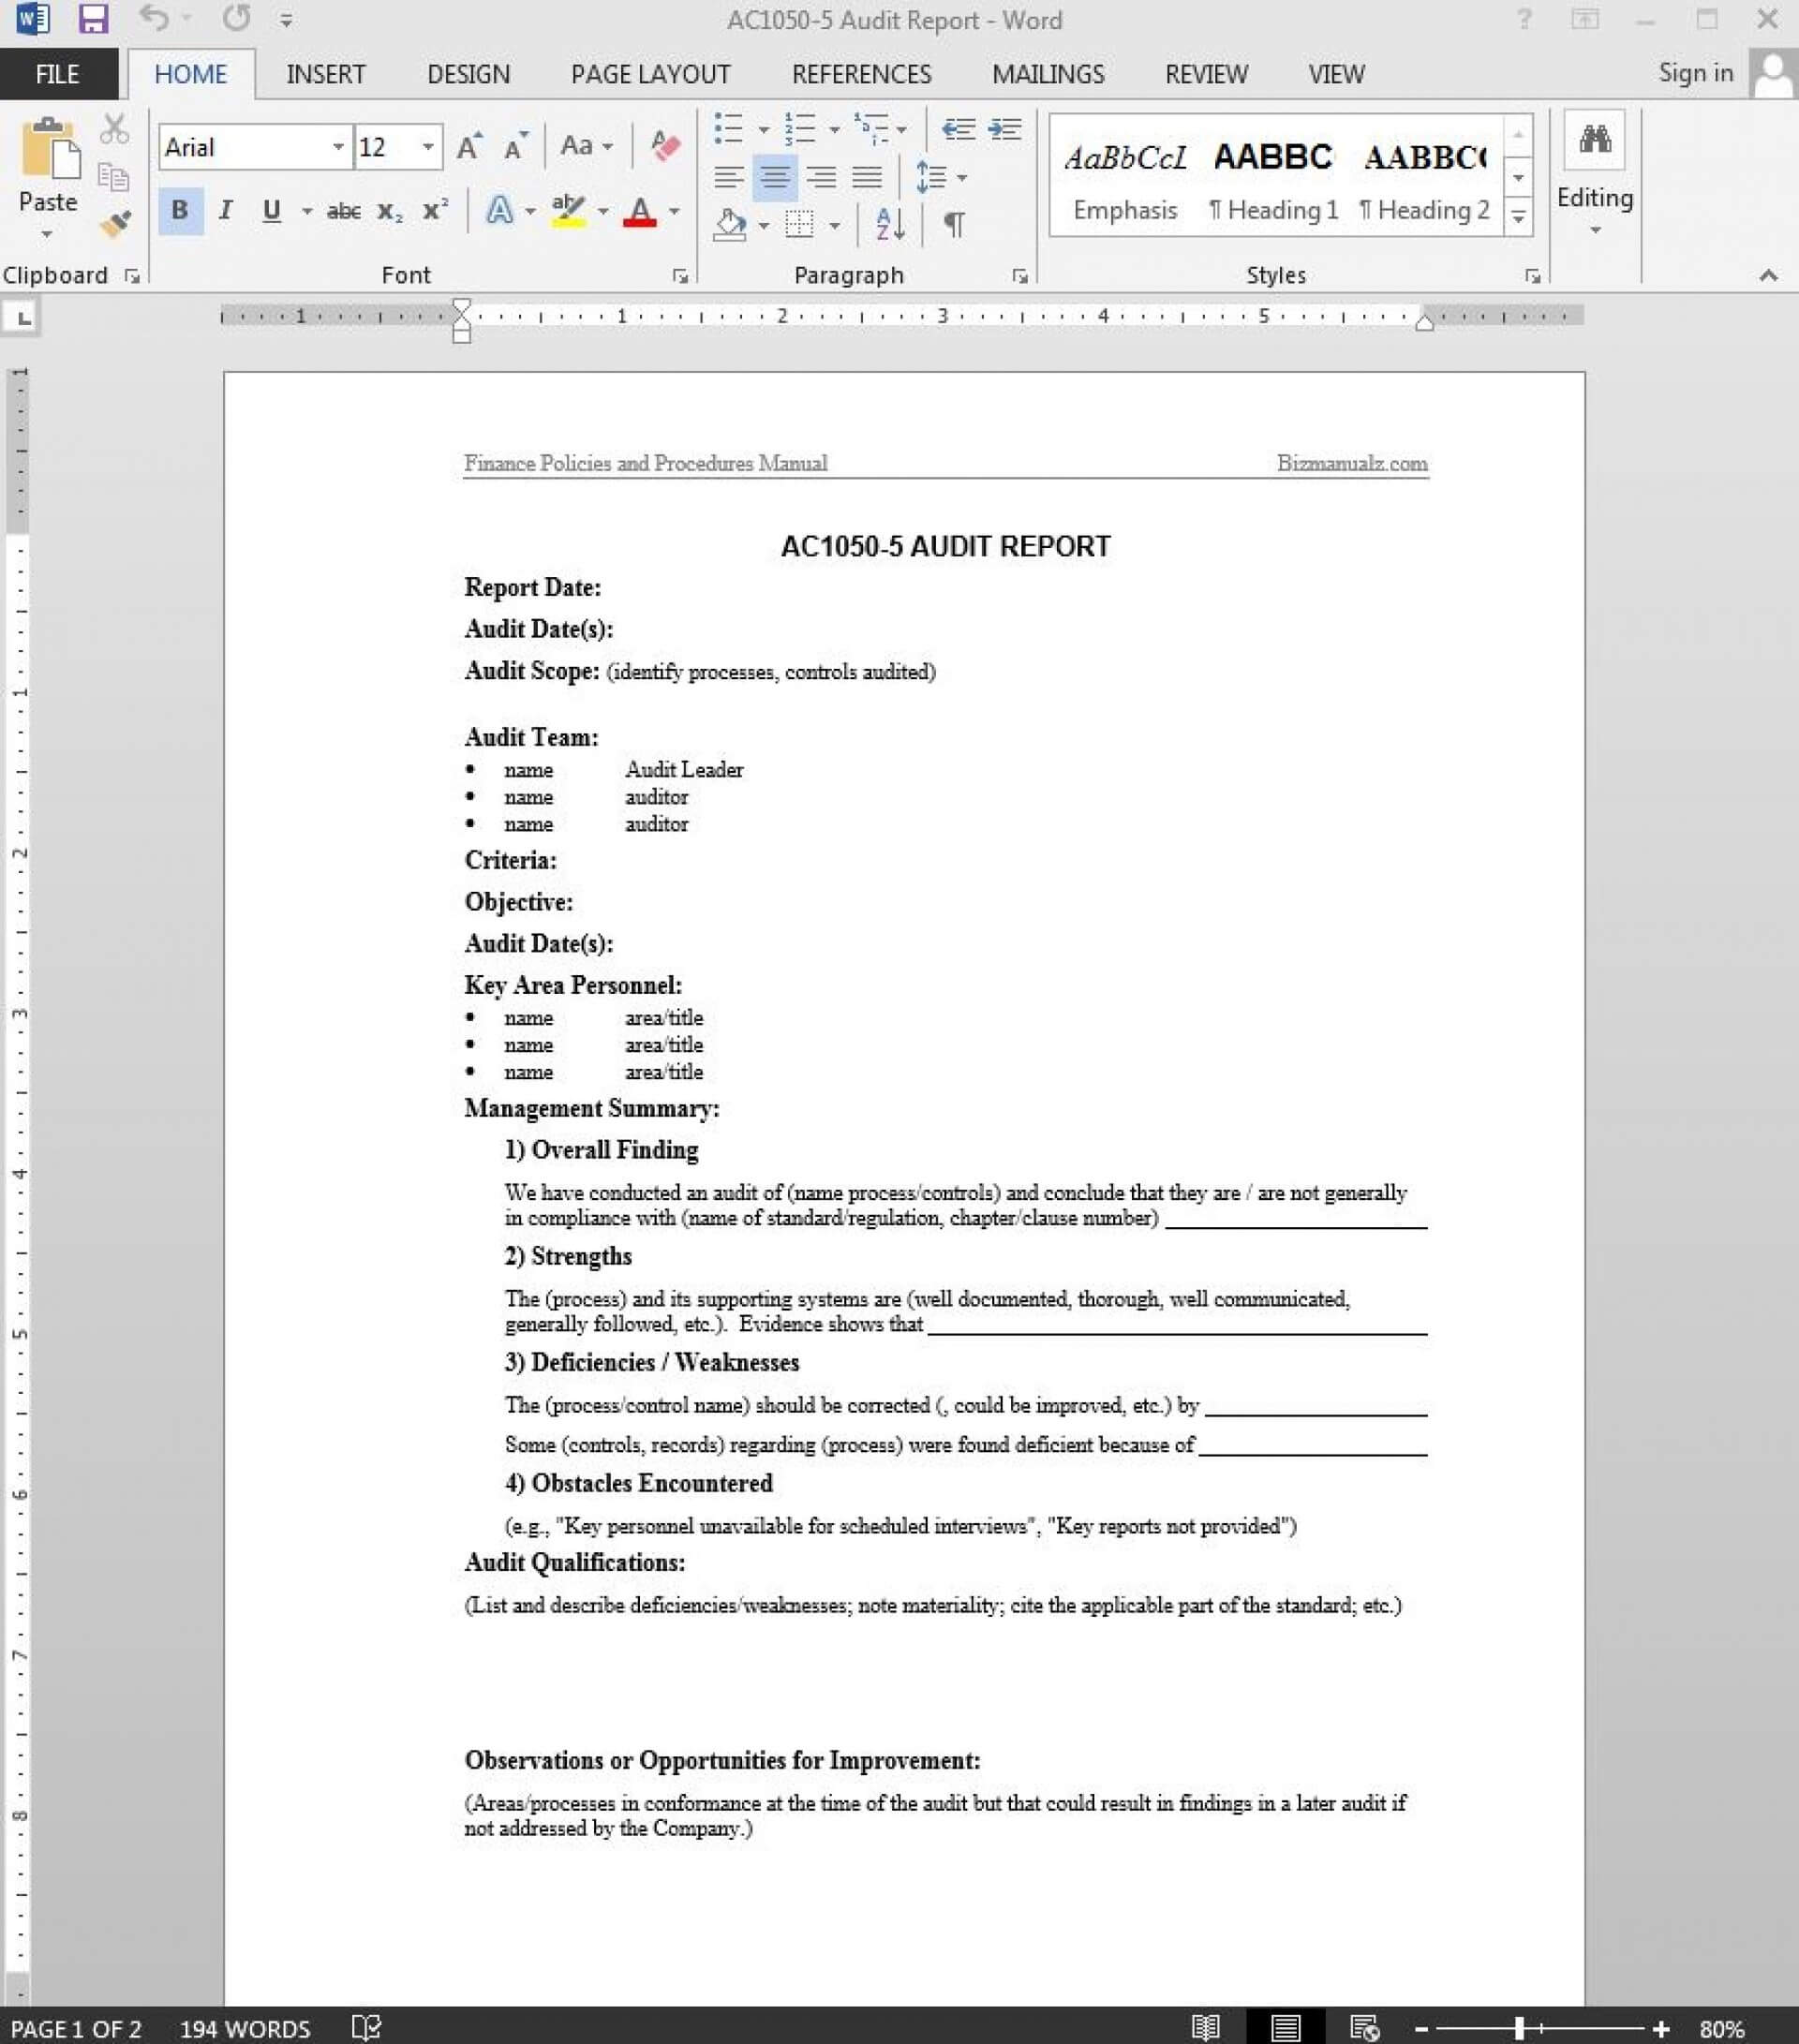 020 Internal Audit Report Template Ideas 008239845 1 With It Audit Report Template Word